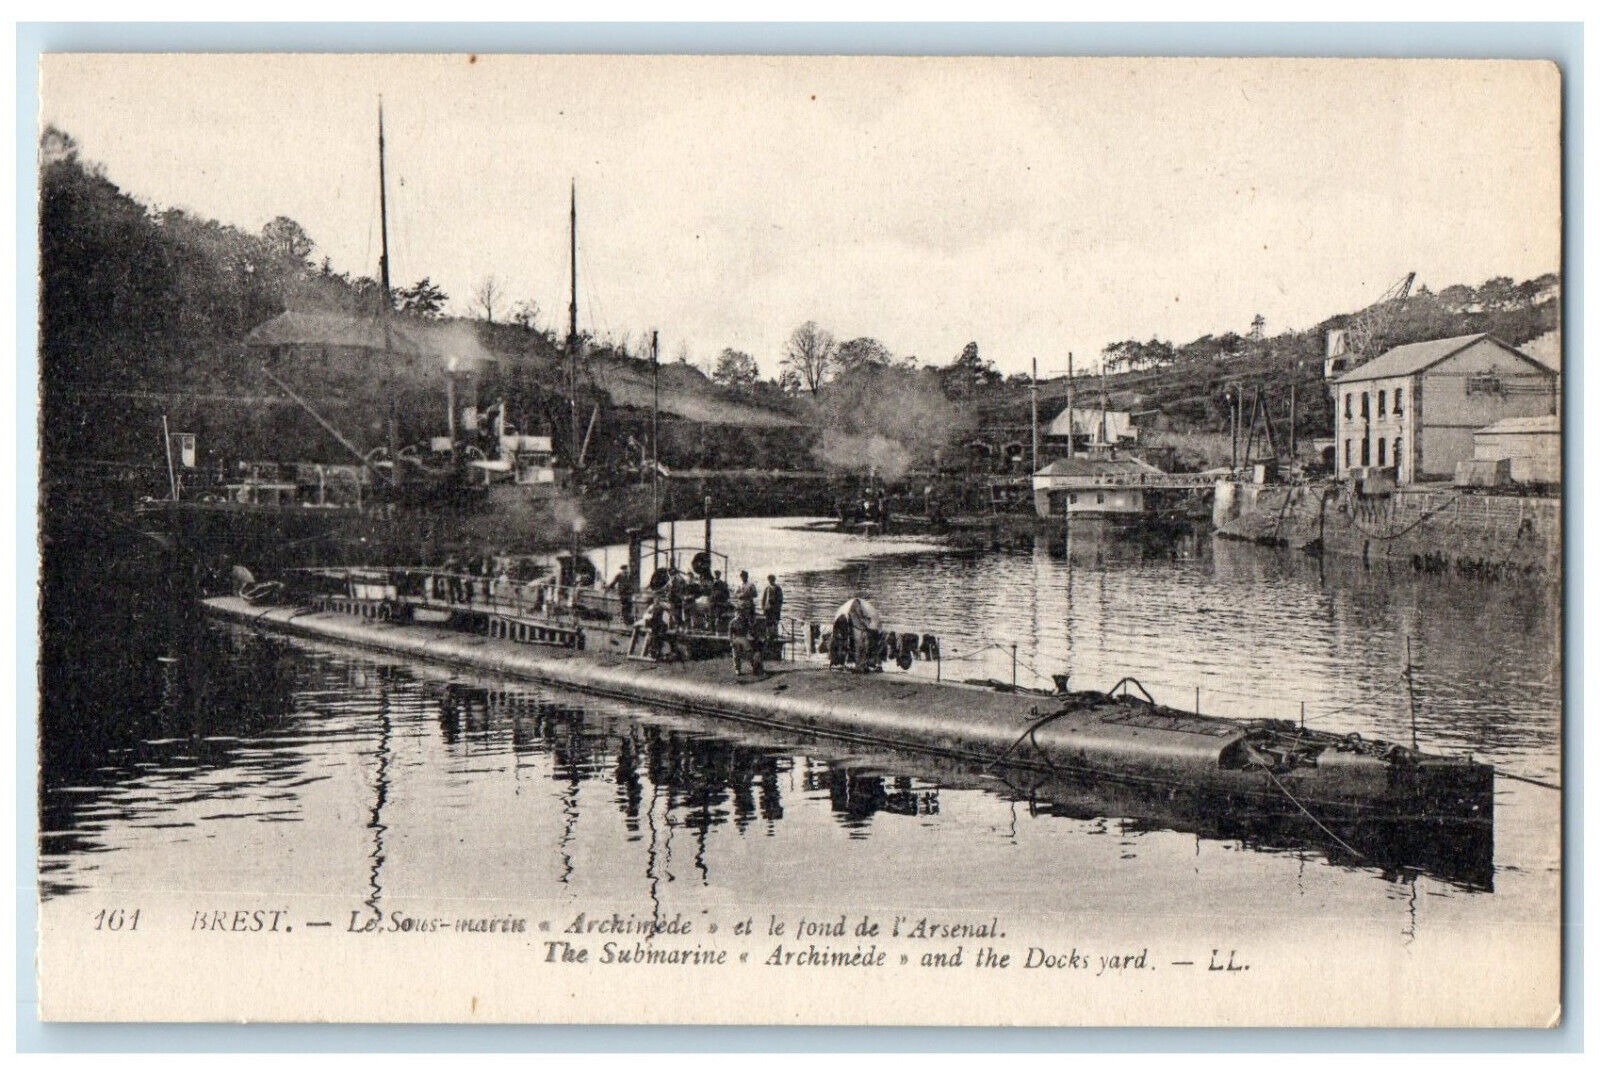 c1910 The Submarine Archimede and the Dock Yard Brest France Antique Postcard